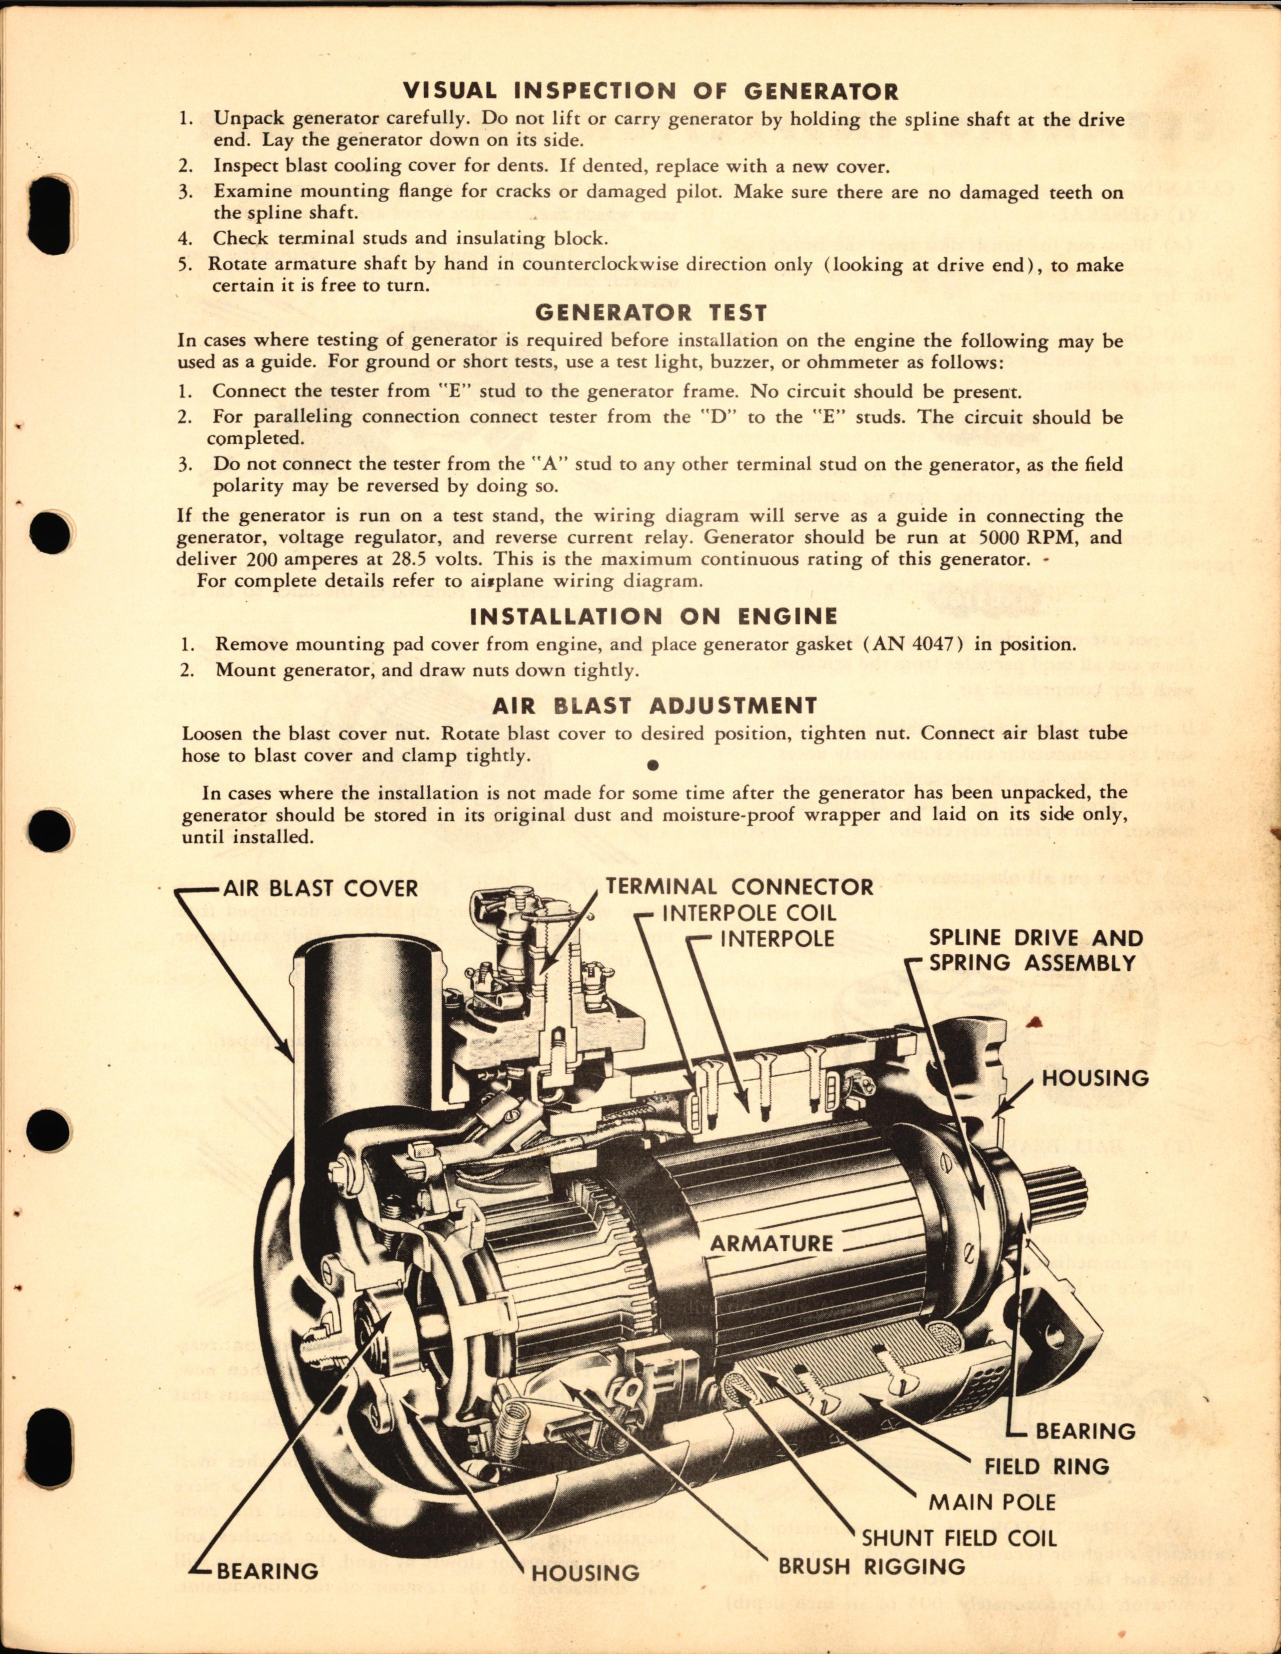 Sample page 66 from AirCorps Library document: Leece-Neville Aircraft Equipment Manual